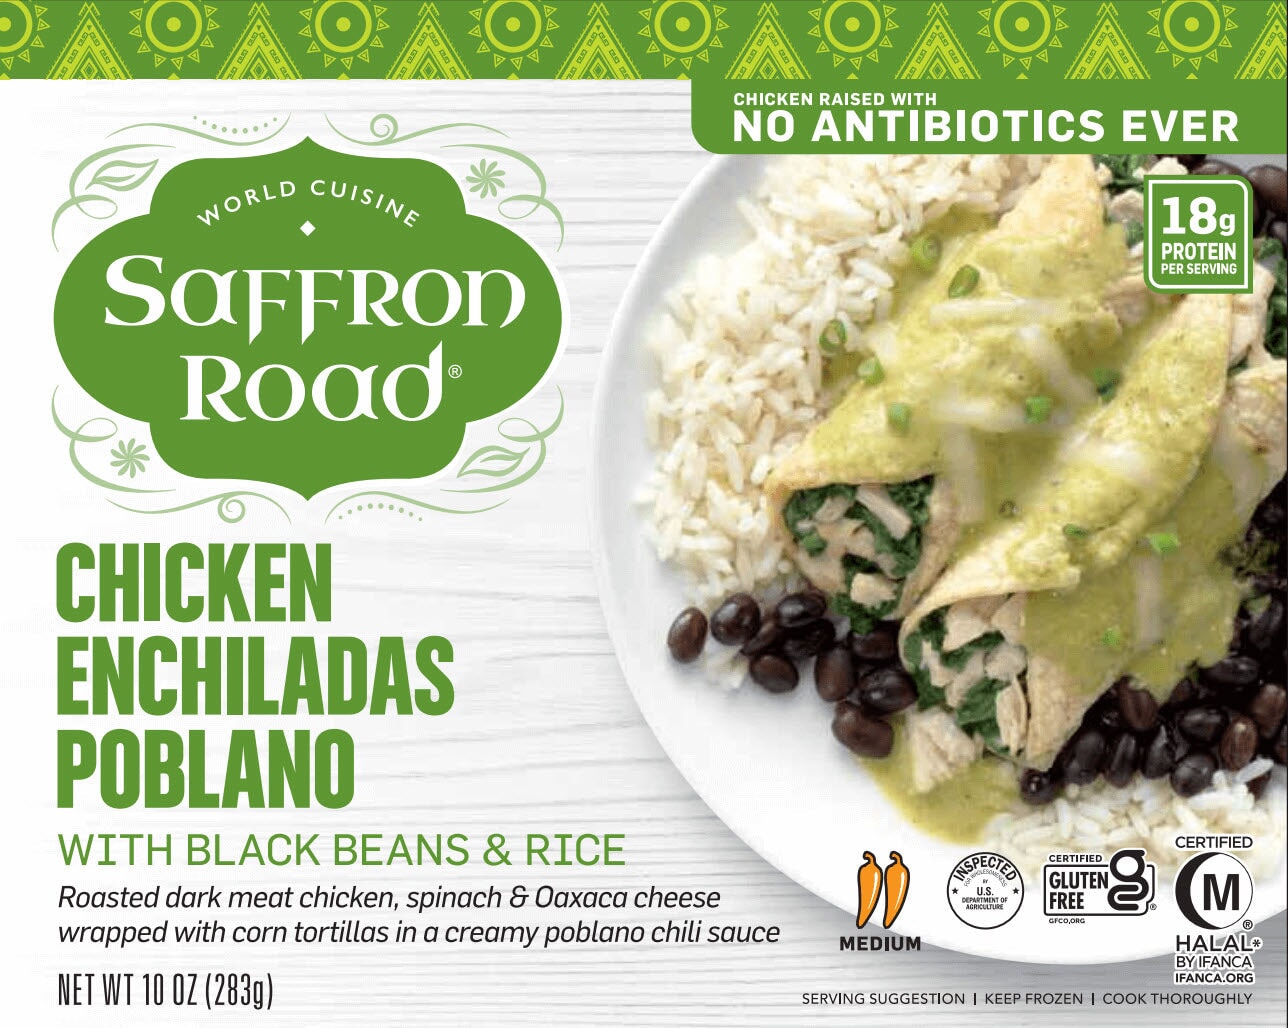 Front of Package with Green Pattern Border, Chicken Raised with No Antibiotics Ever Text, 18g Protein Per Serving, Medium Spice, Gluten-Free, Halal